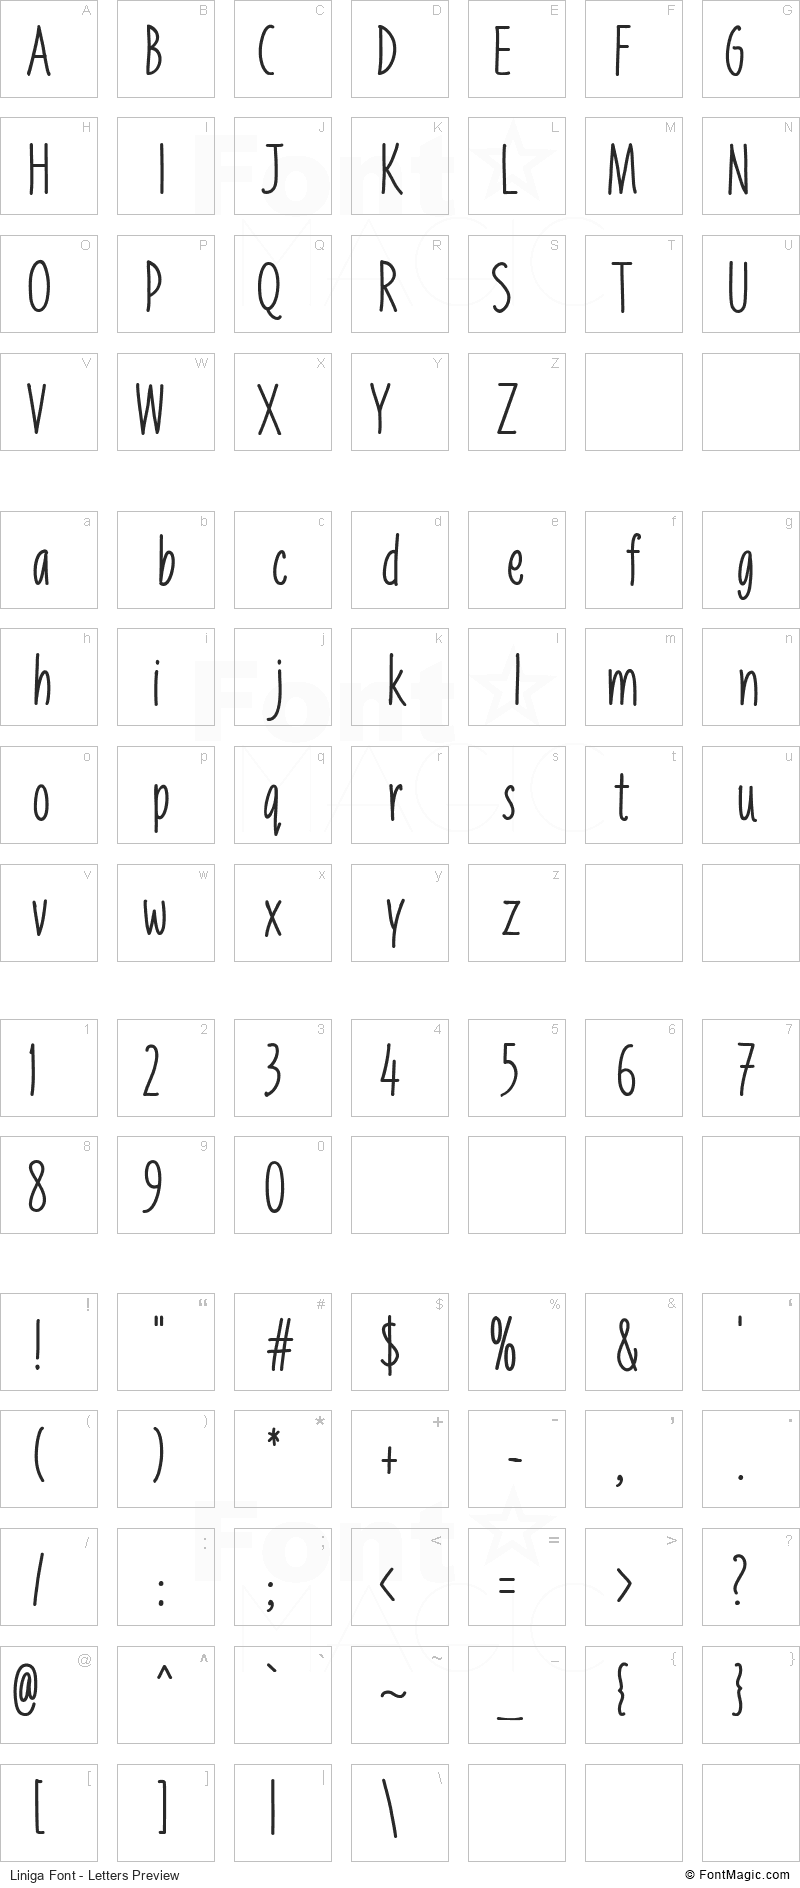 Liniga Font - All Latters Preview Chart